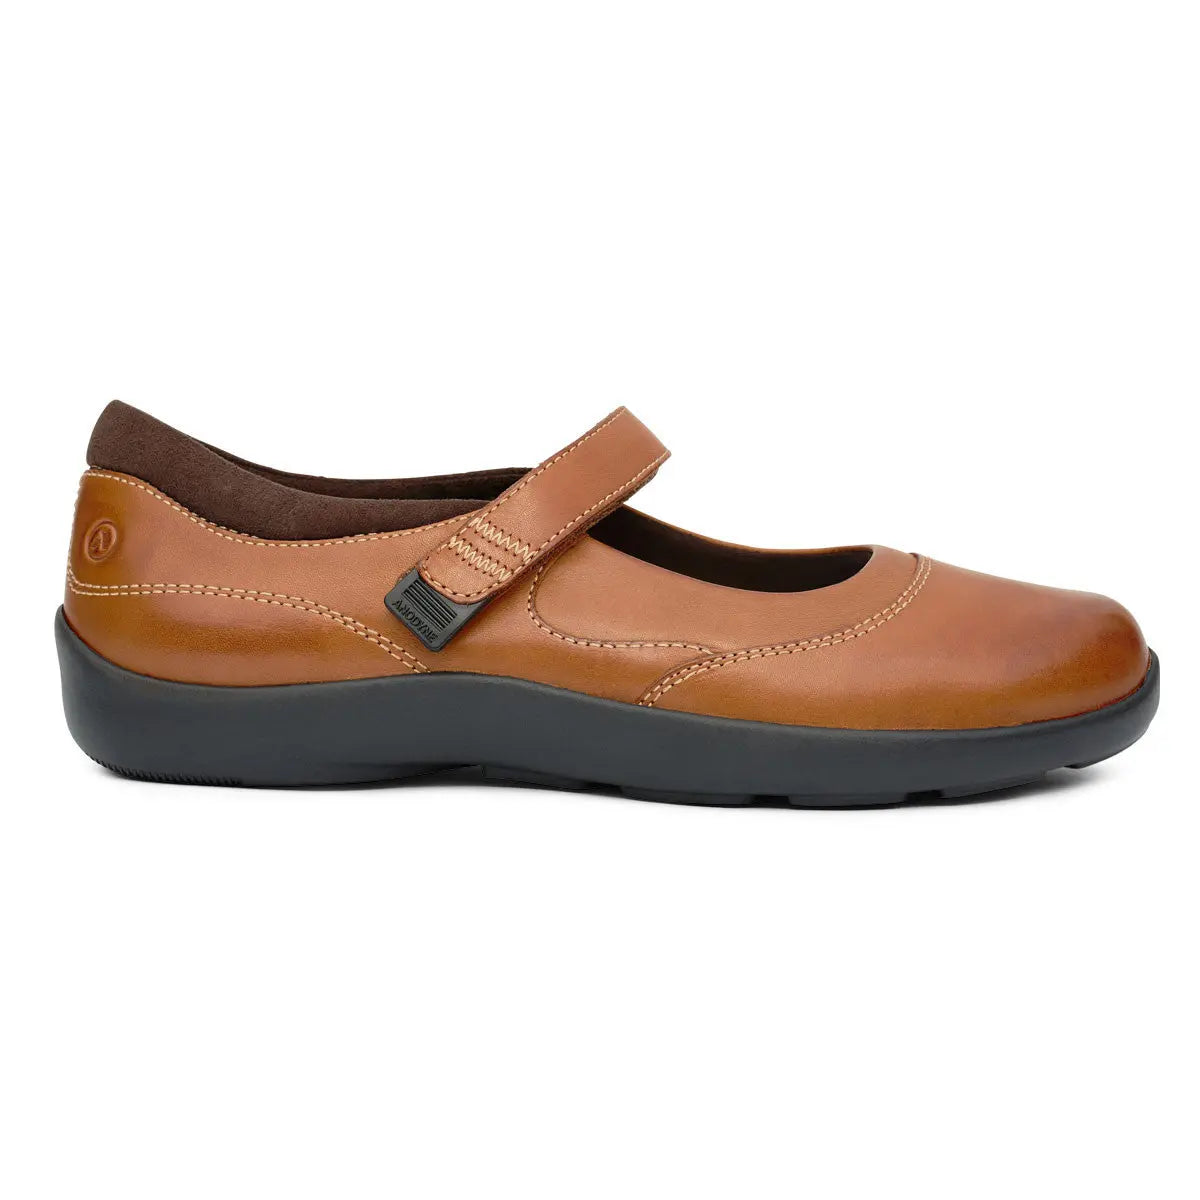 Diabetic Casual Mary Jane Shoe for Women, Cognac - Right Side Image | No. 19 | Anodyne